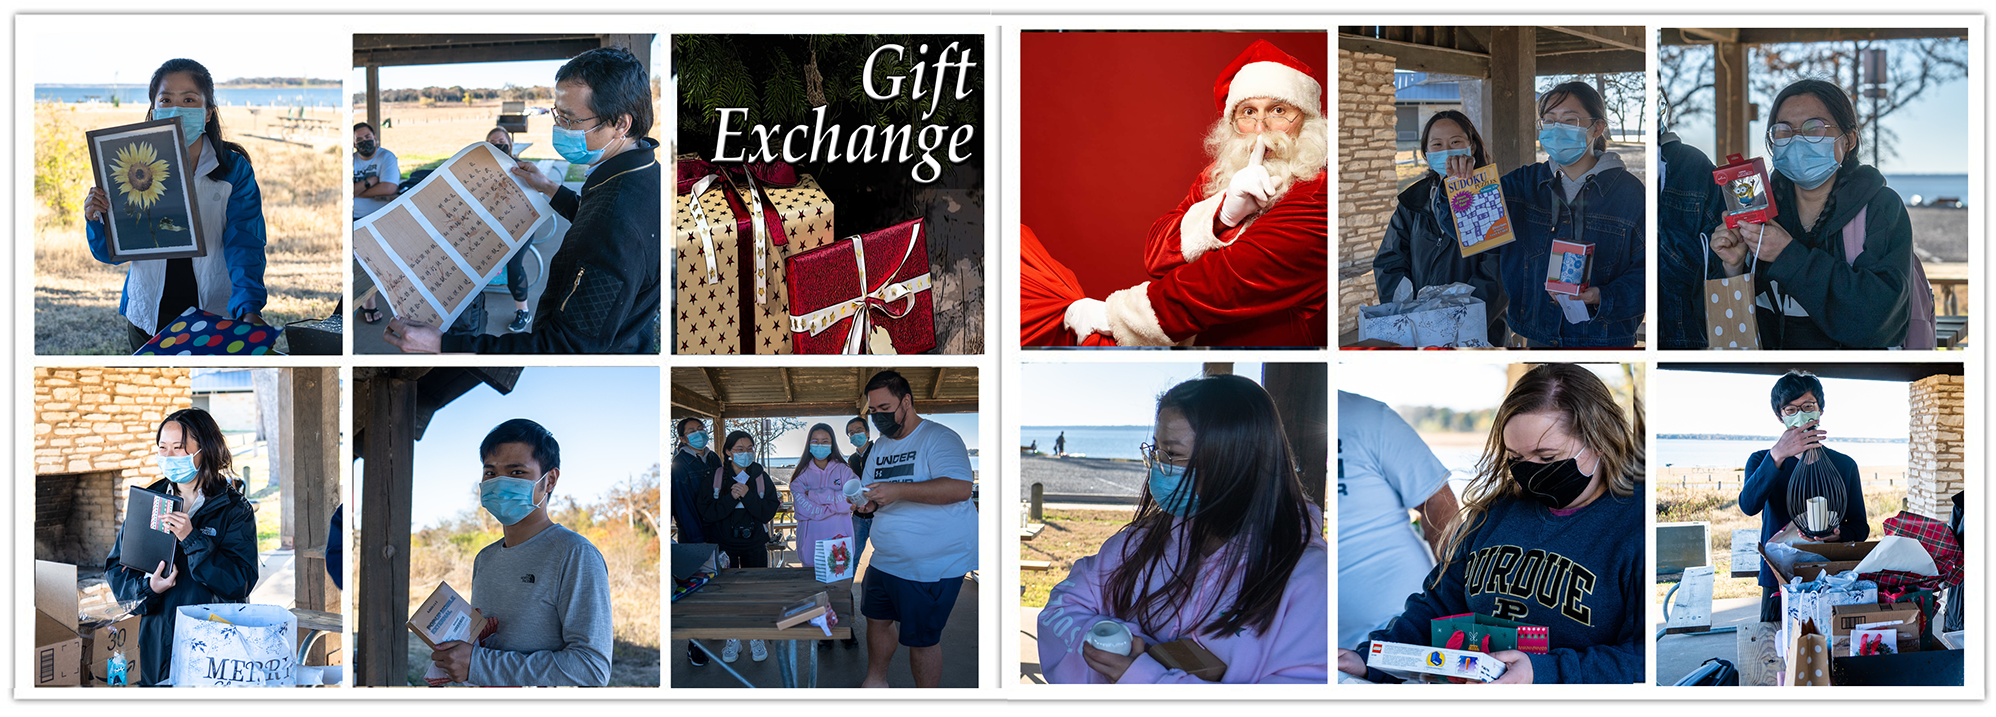 101996717518-gift-exchange-new.png